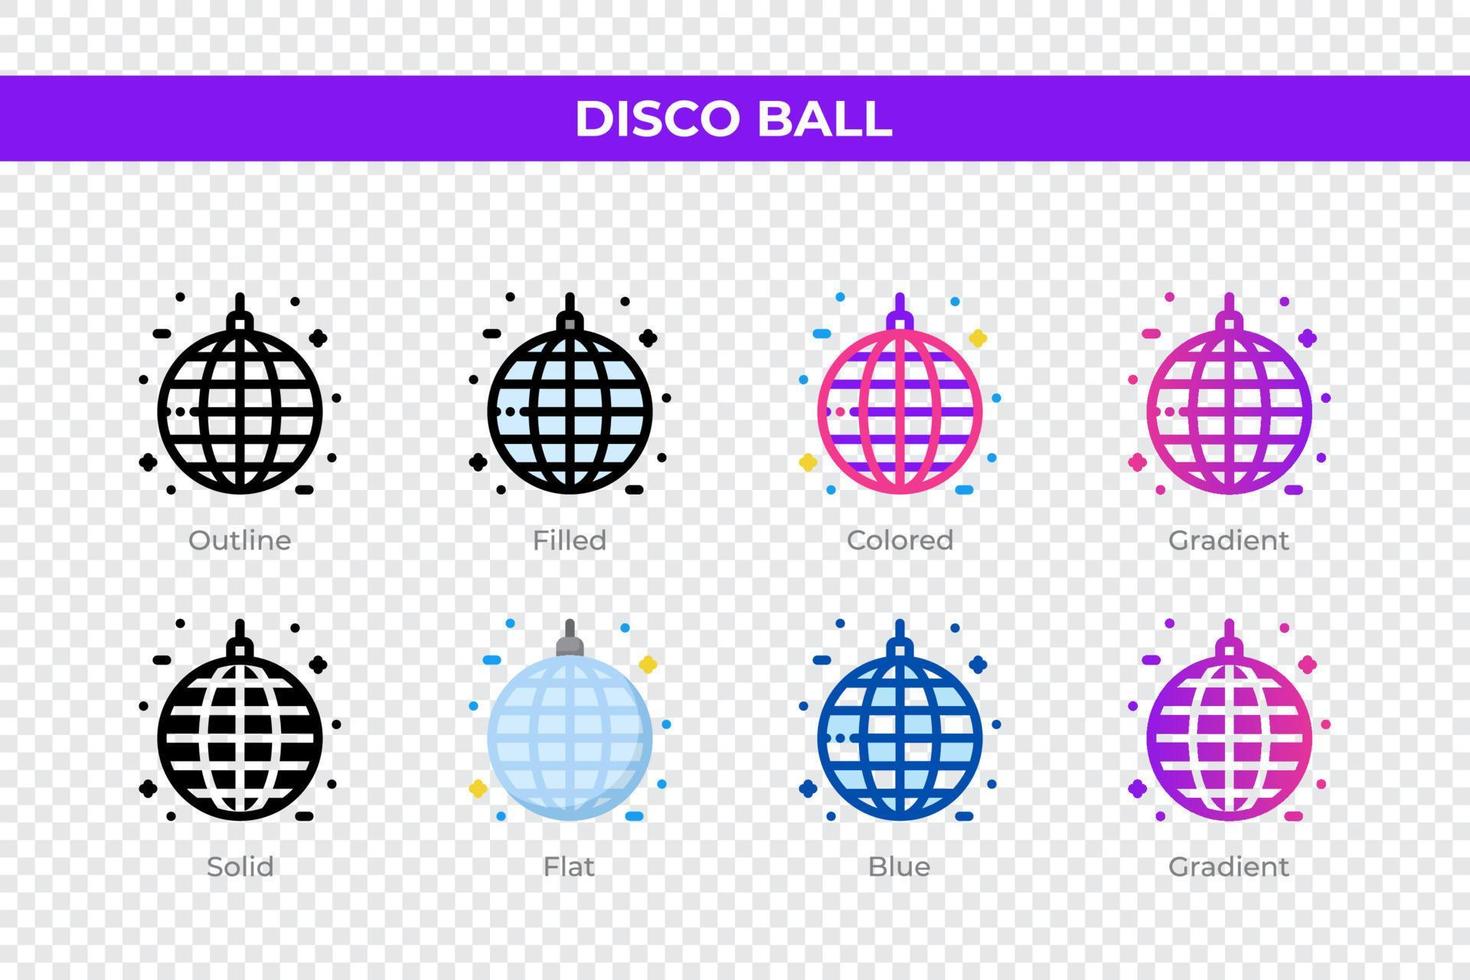 Disco ball icons in different style. Disco ball icons set. Holiday symbol. Different style icons set. Vector illustration